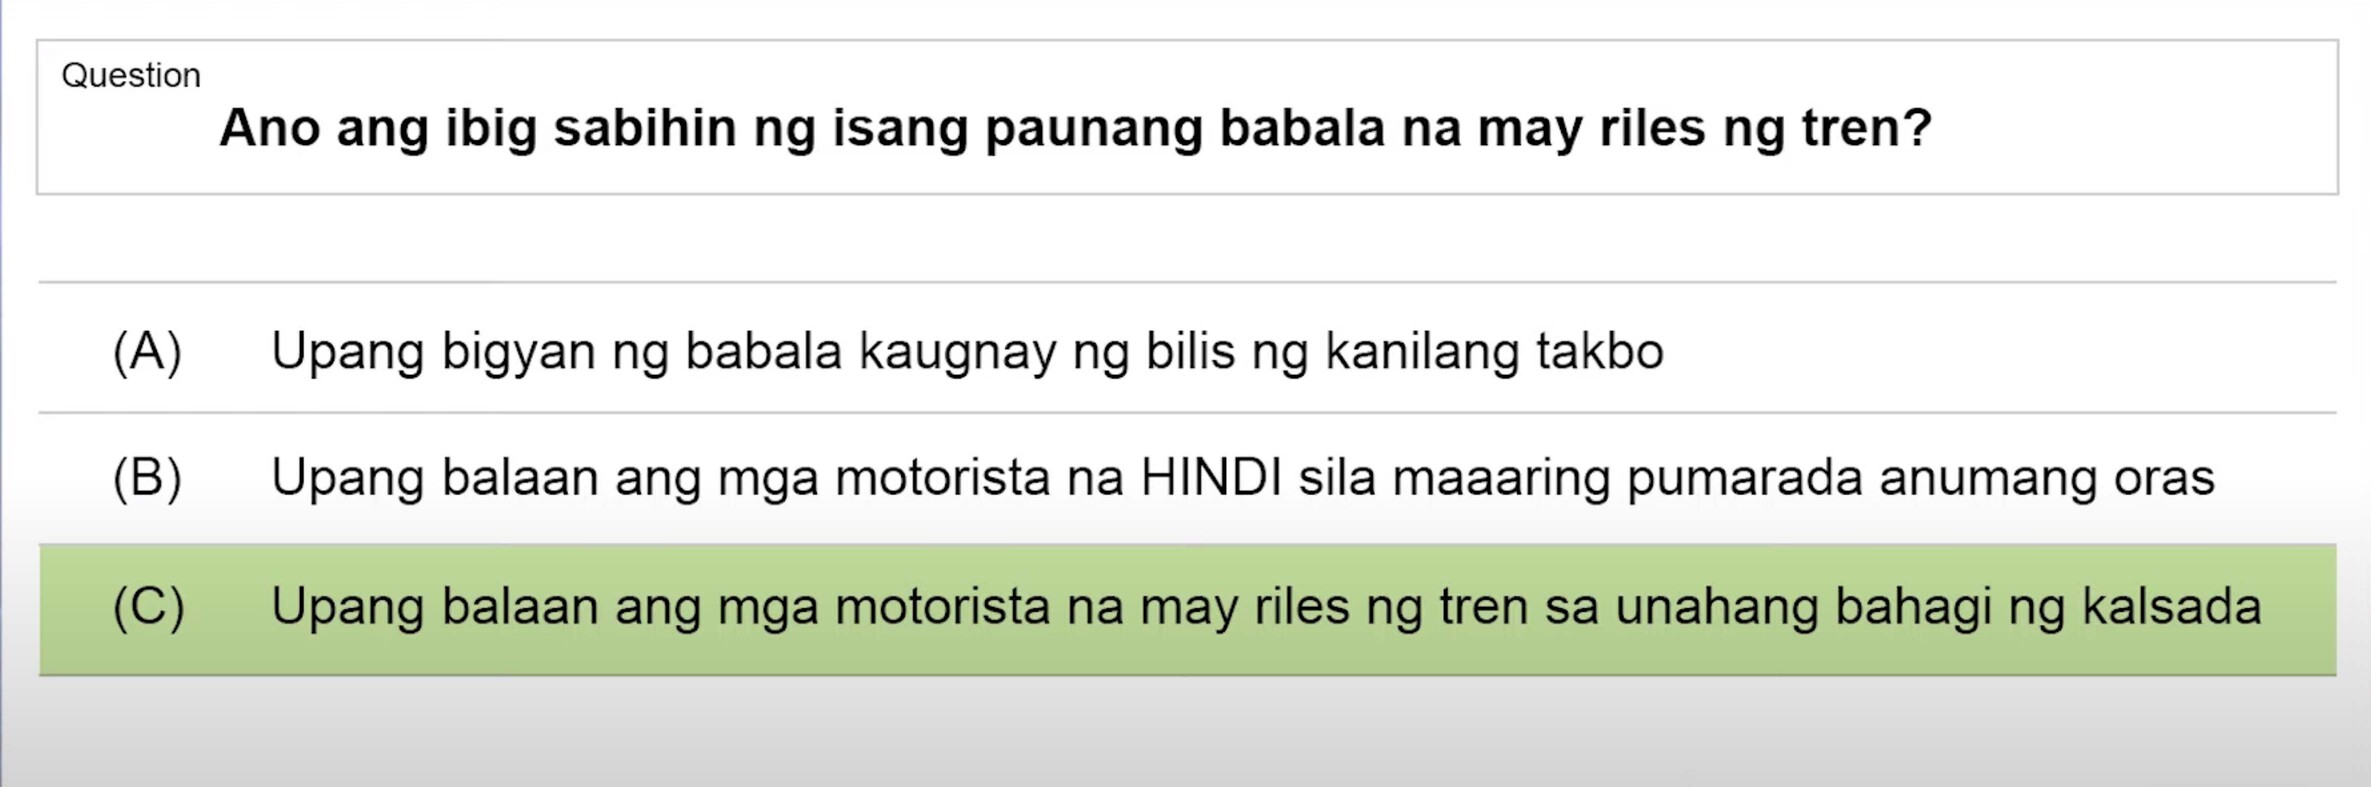 LTO Tagalog non pro exam reviewer motorcycle (41)